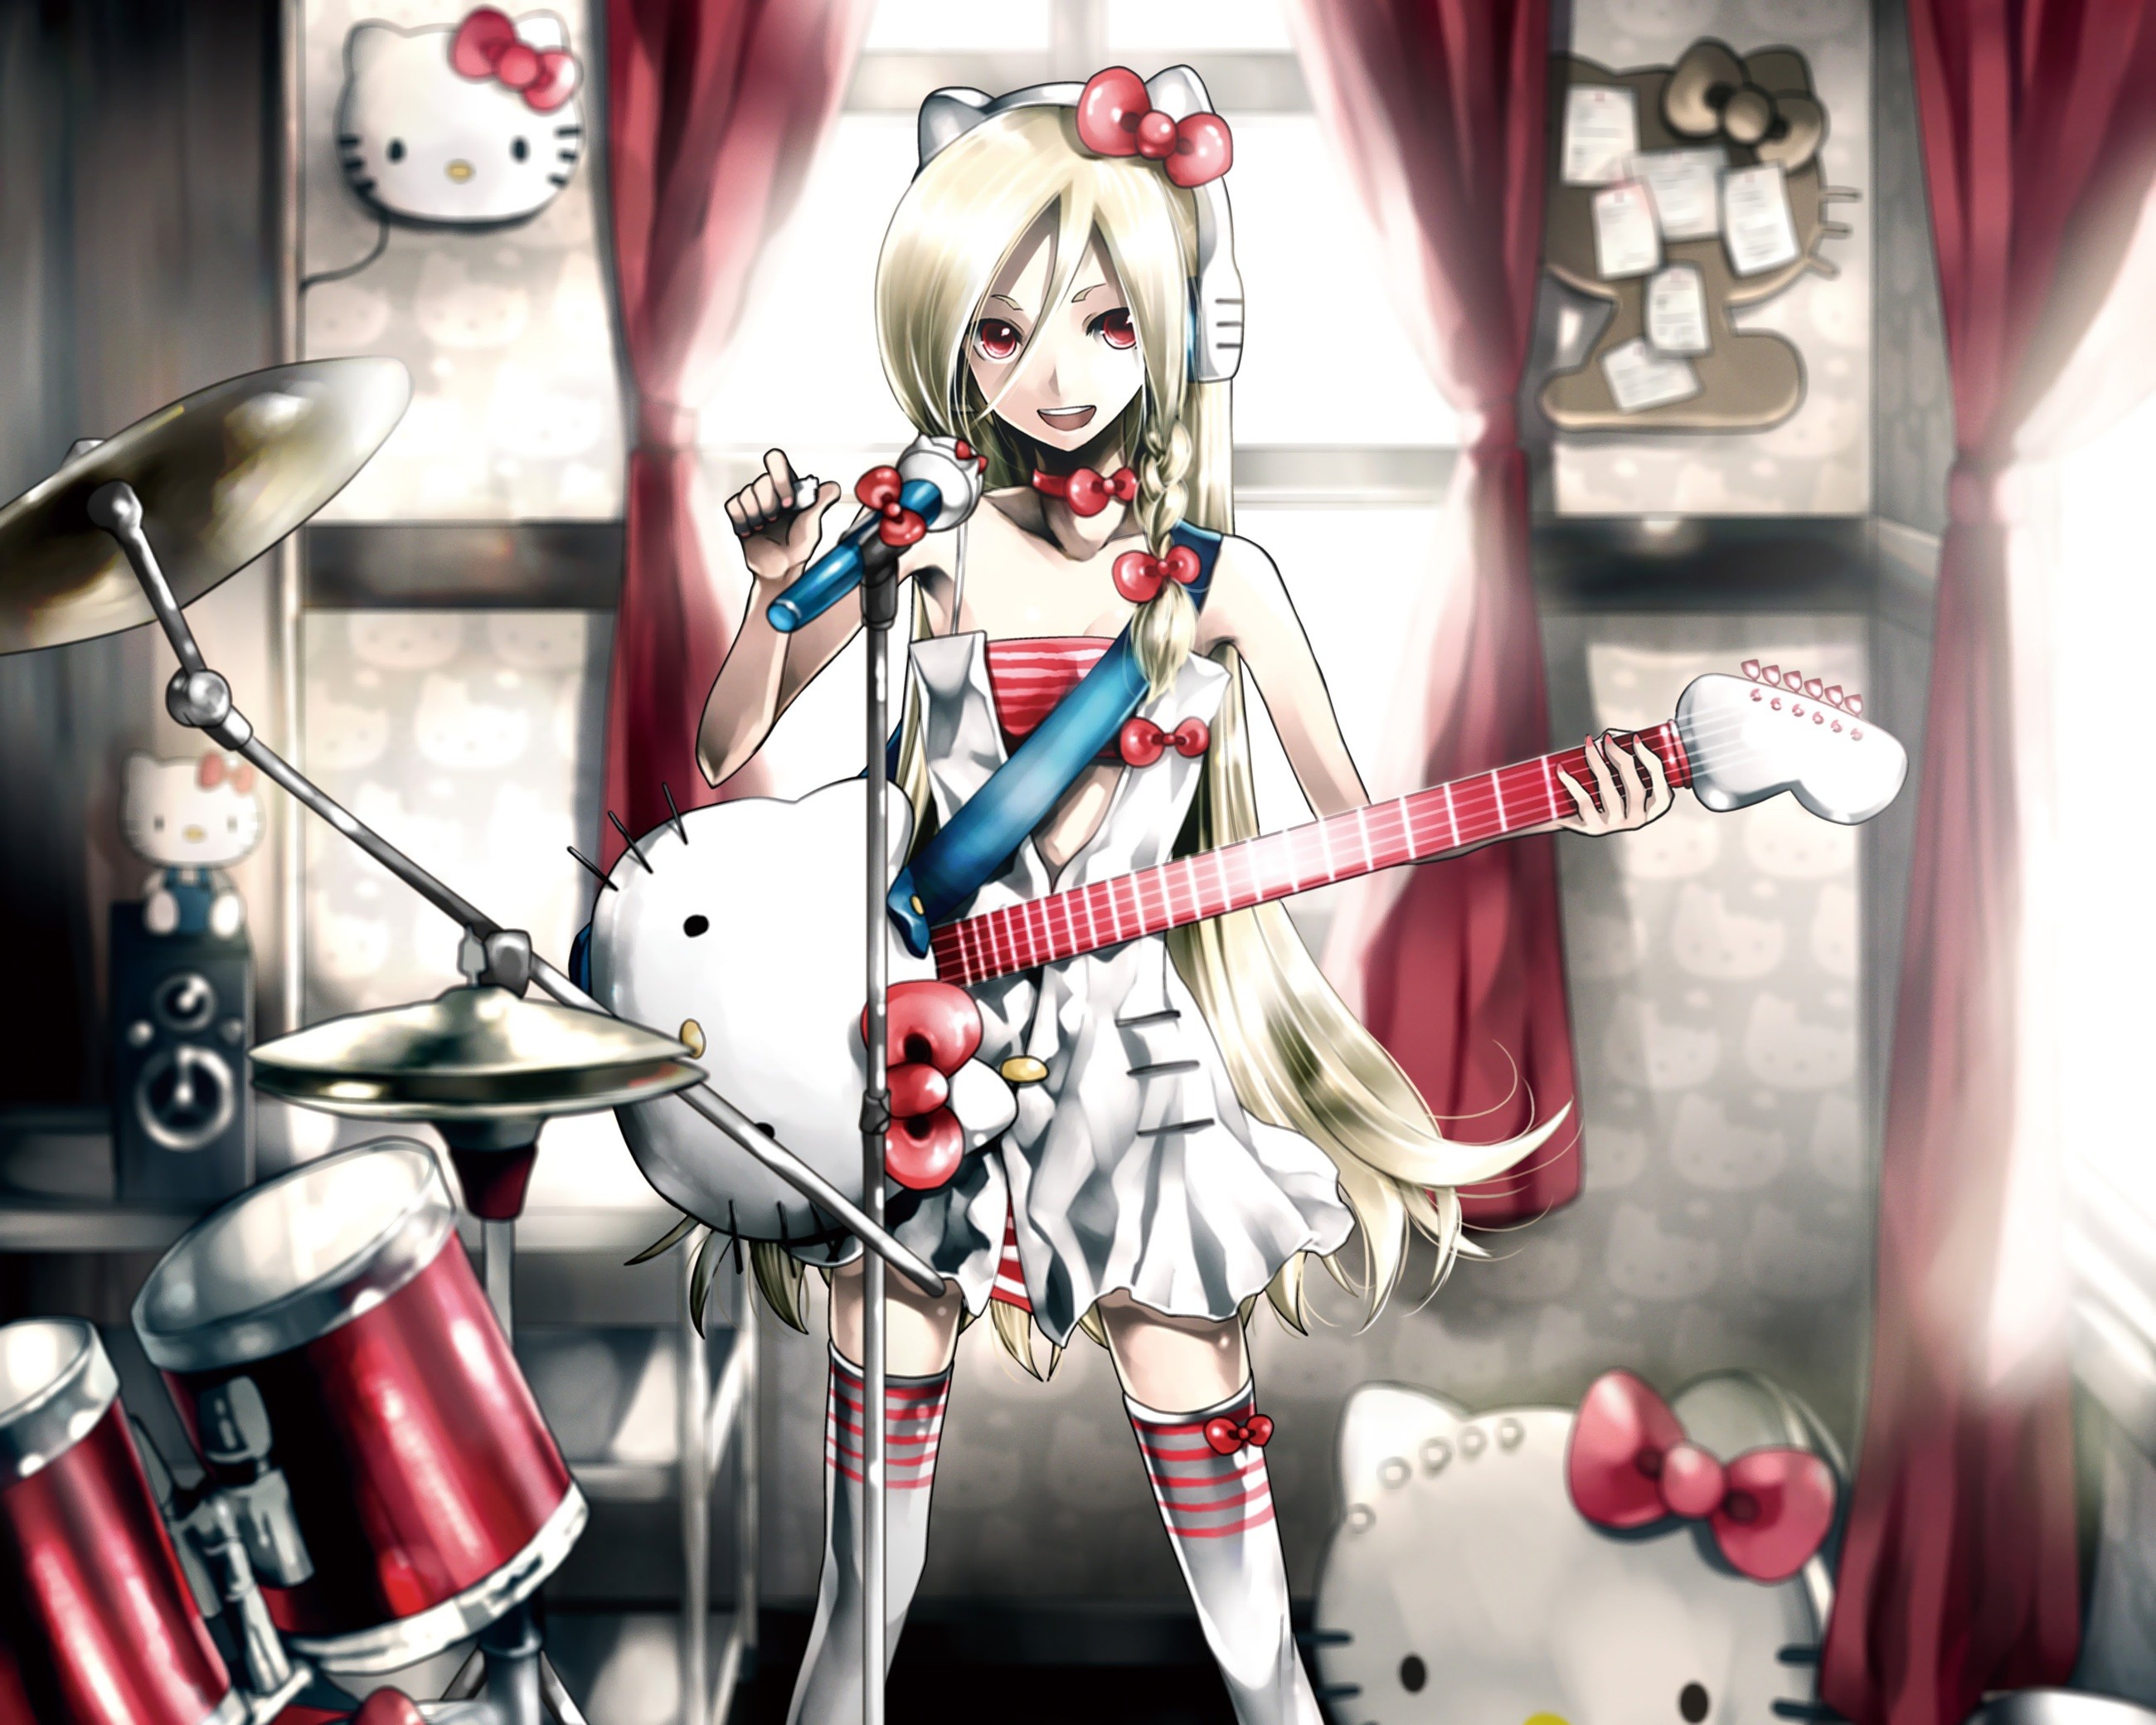 headphones, Blondes, Dress, Indoors, Room, Long, Hair, Nekomimi, Hello, Kitty, Animal, Ears, Red, Eyes, Thigh, Highs, Instruments, Guitars, Drums, Bows, Drum, Set, Open, Mouth, Curtains, Choker, White, Dress, An Wallpaper